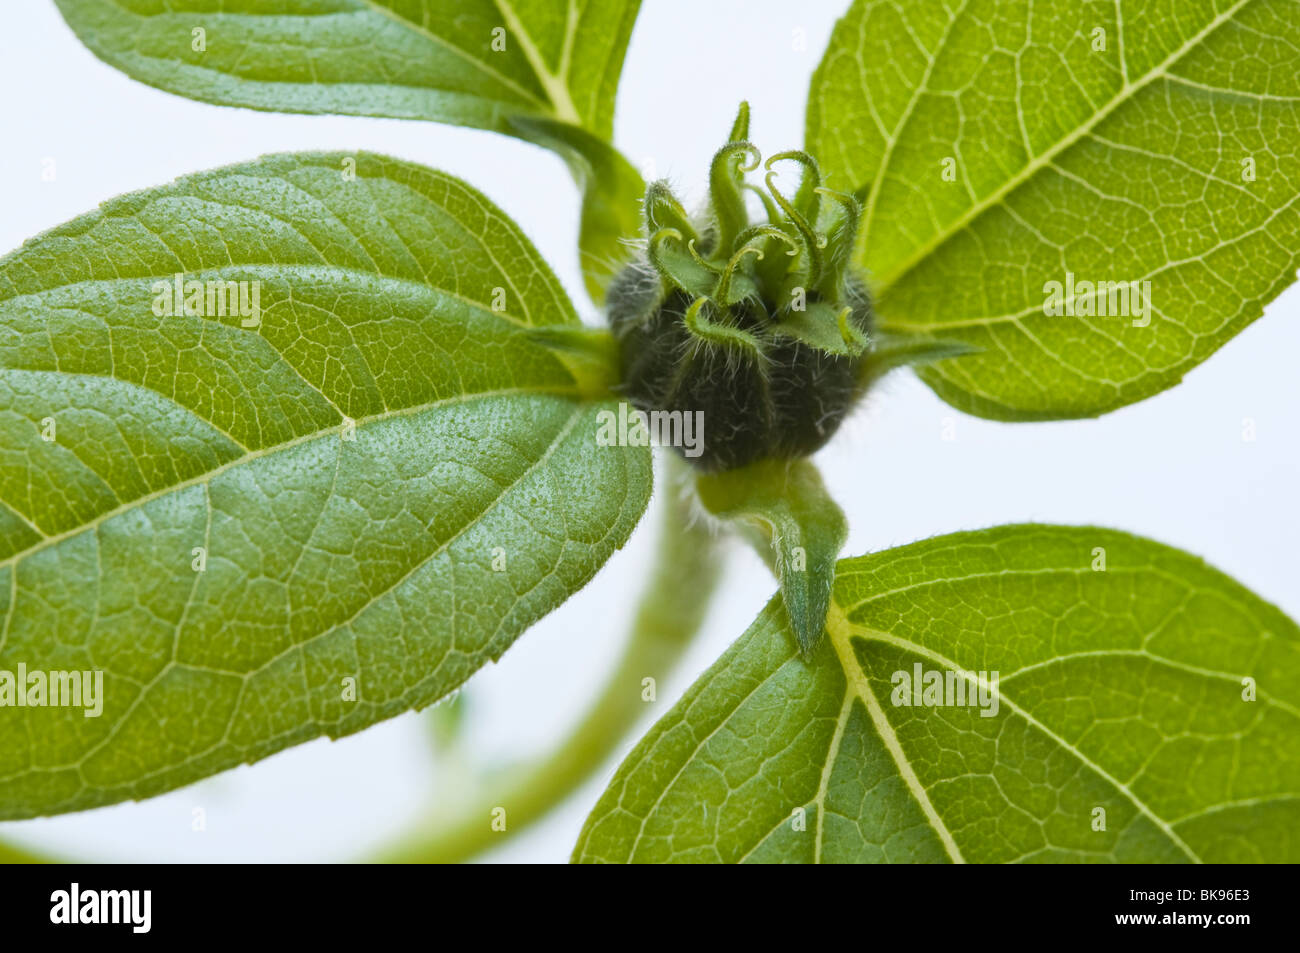 Bud of a Sunflower with leaves. Stock Photo